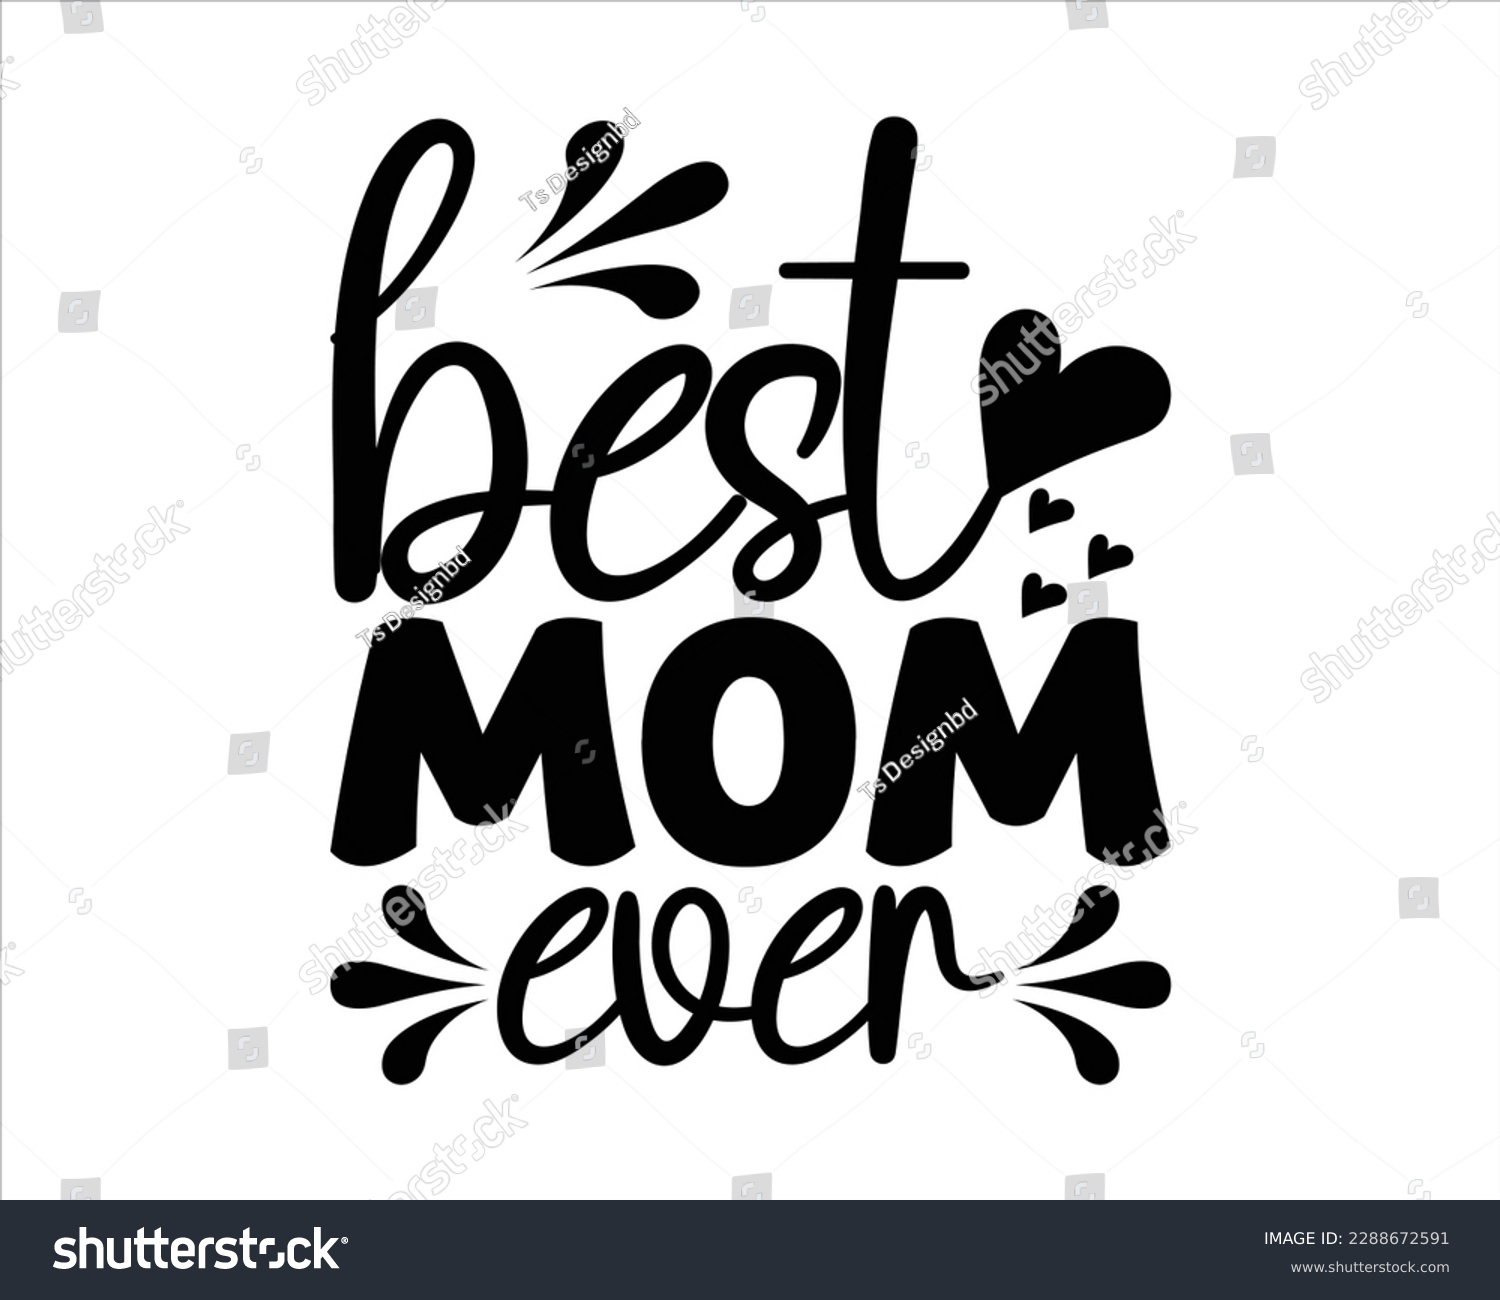 SVG of Best Mom Ever Svg Desig,Quotes about Mother,Mom svg design,Mother's day typographic t shirt design, Mom Life Svg,funny mom svg design svg